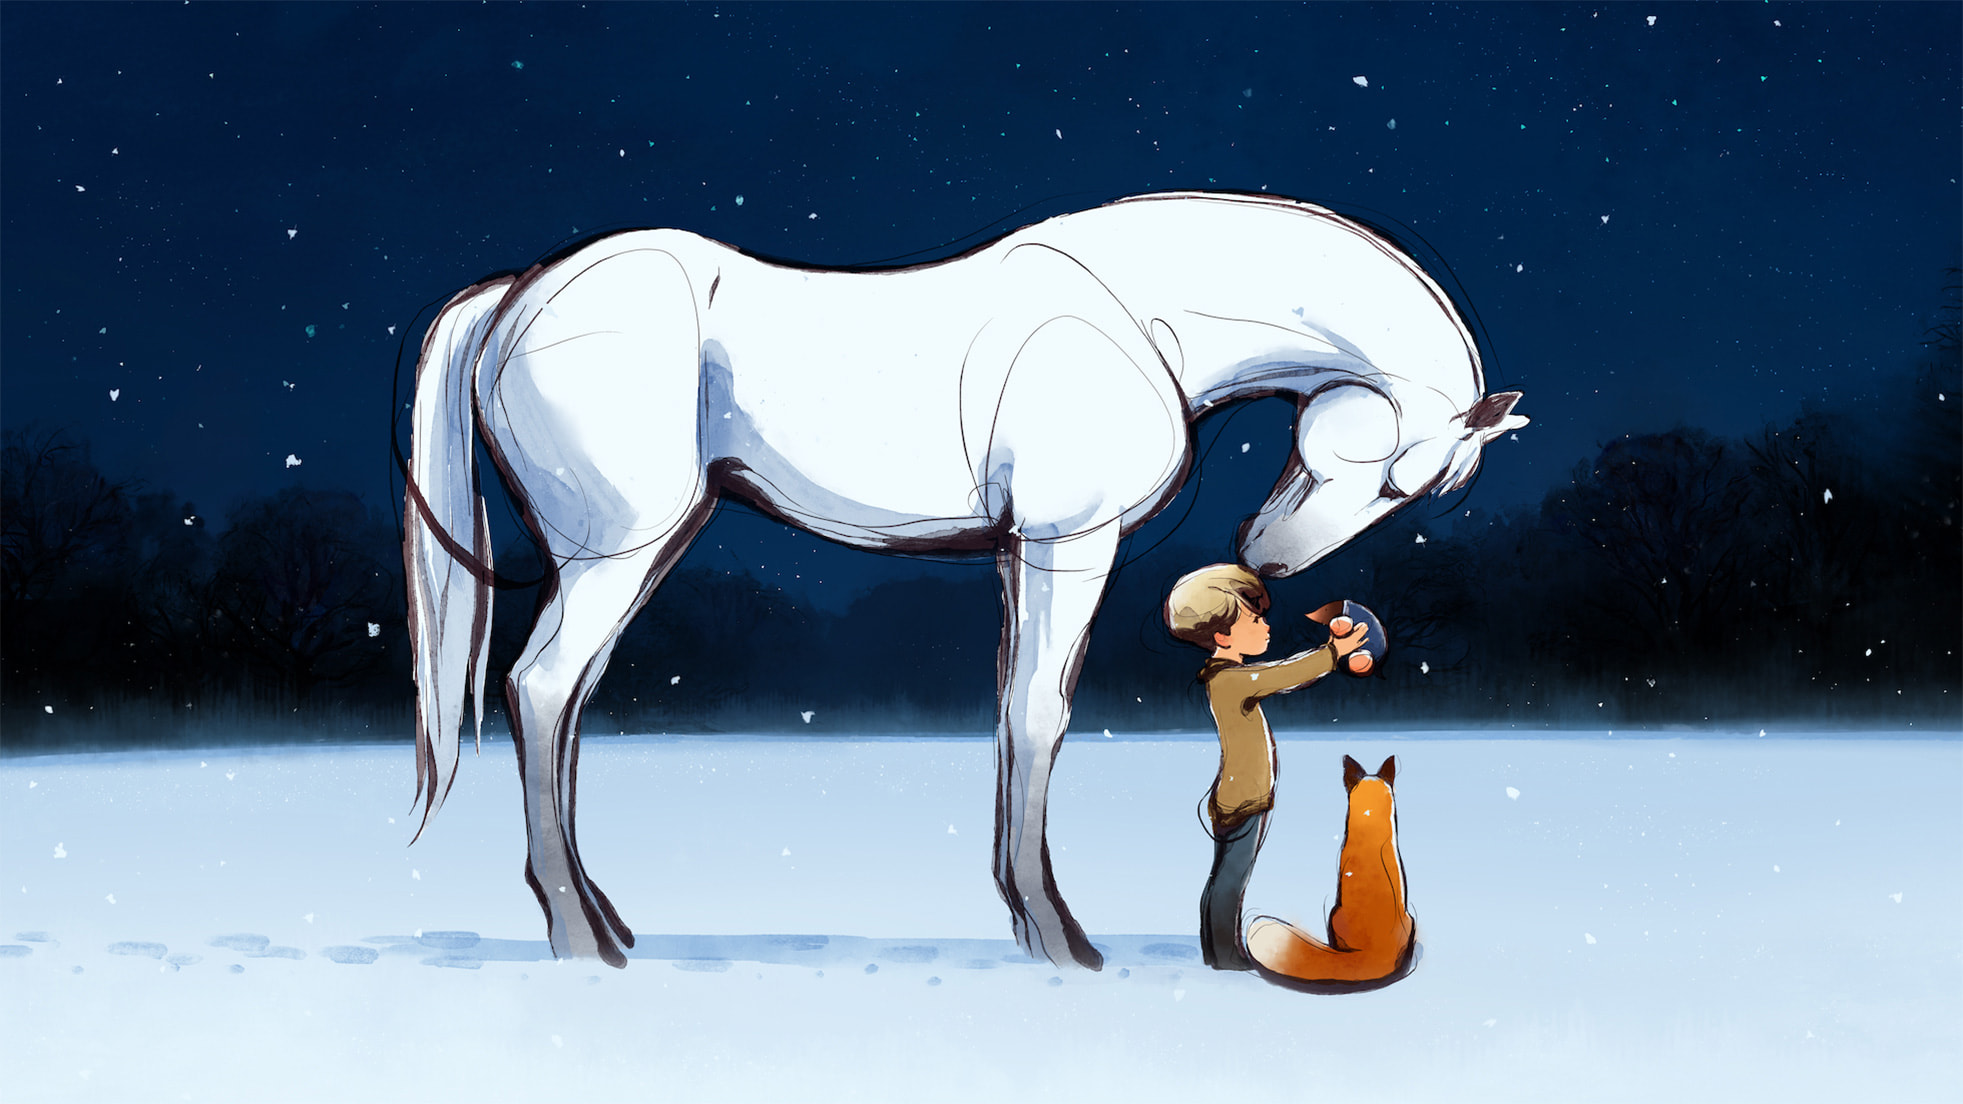 Illustration depicting a boy, a horse and a fox for the Apple TV+ animated short film “The Boy, the Mole, the Fox and the Horse” 